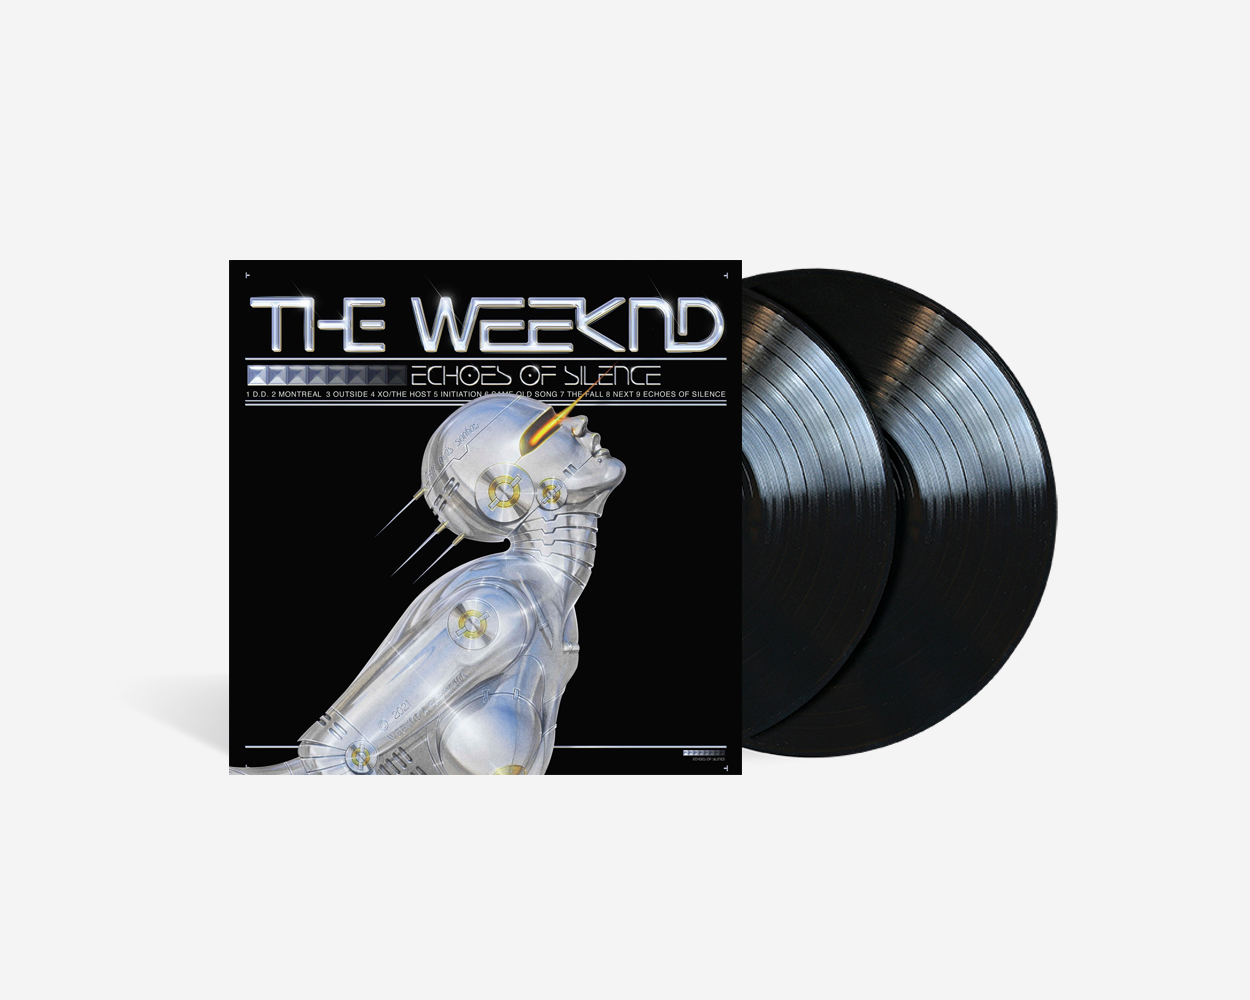 The Weeknd - Echoes Of Silence — buy vinyl records and accessories